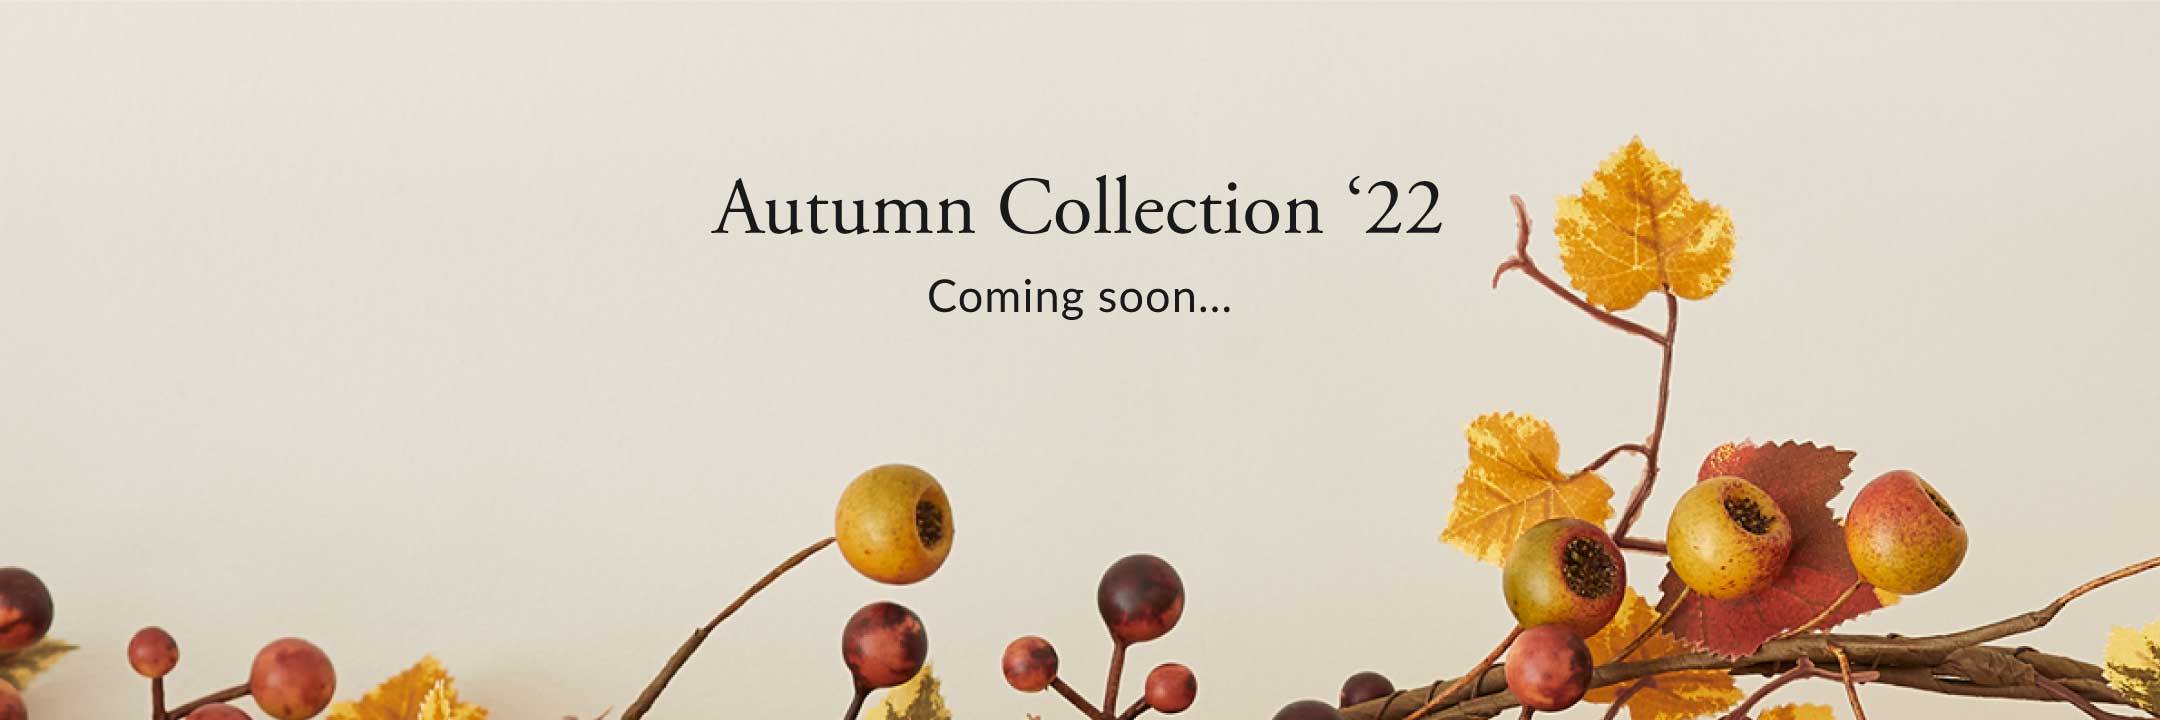 Autumn & Halloween 2022 collection coming soon banner